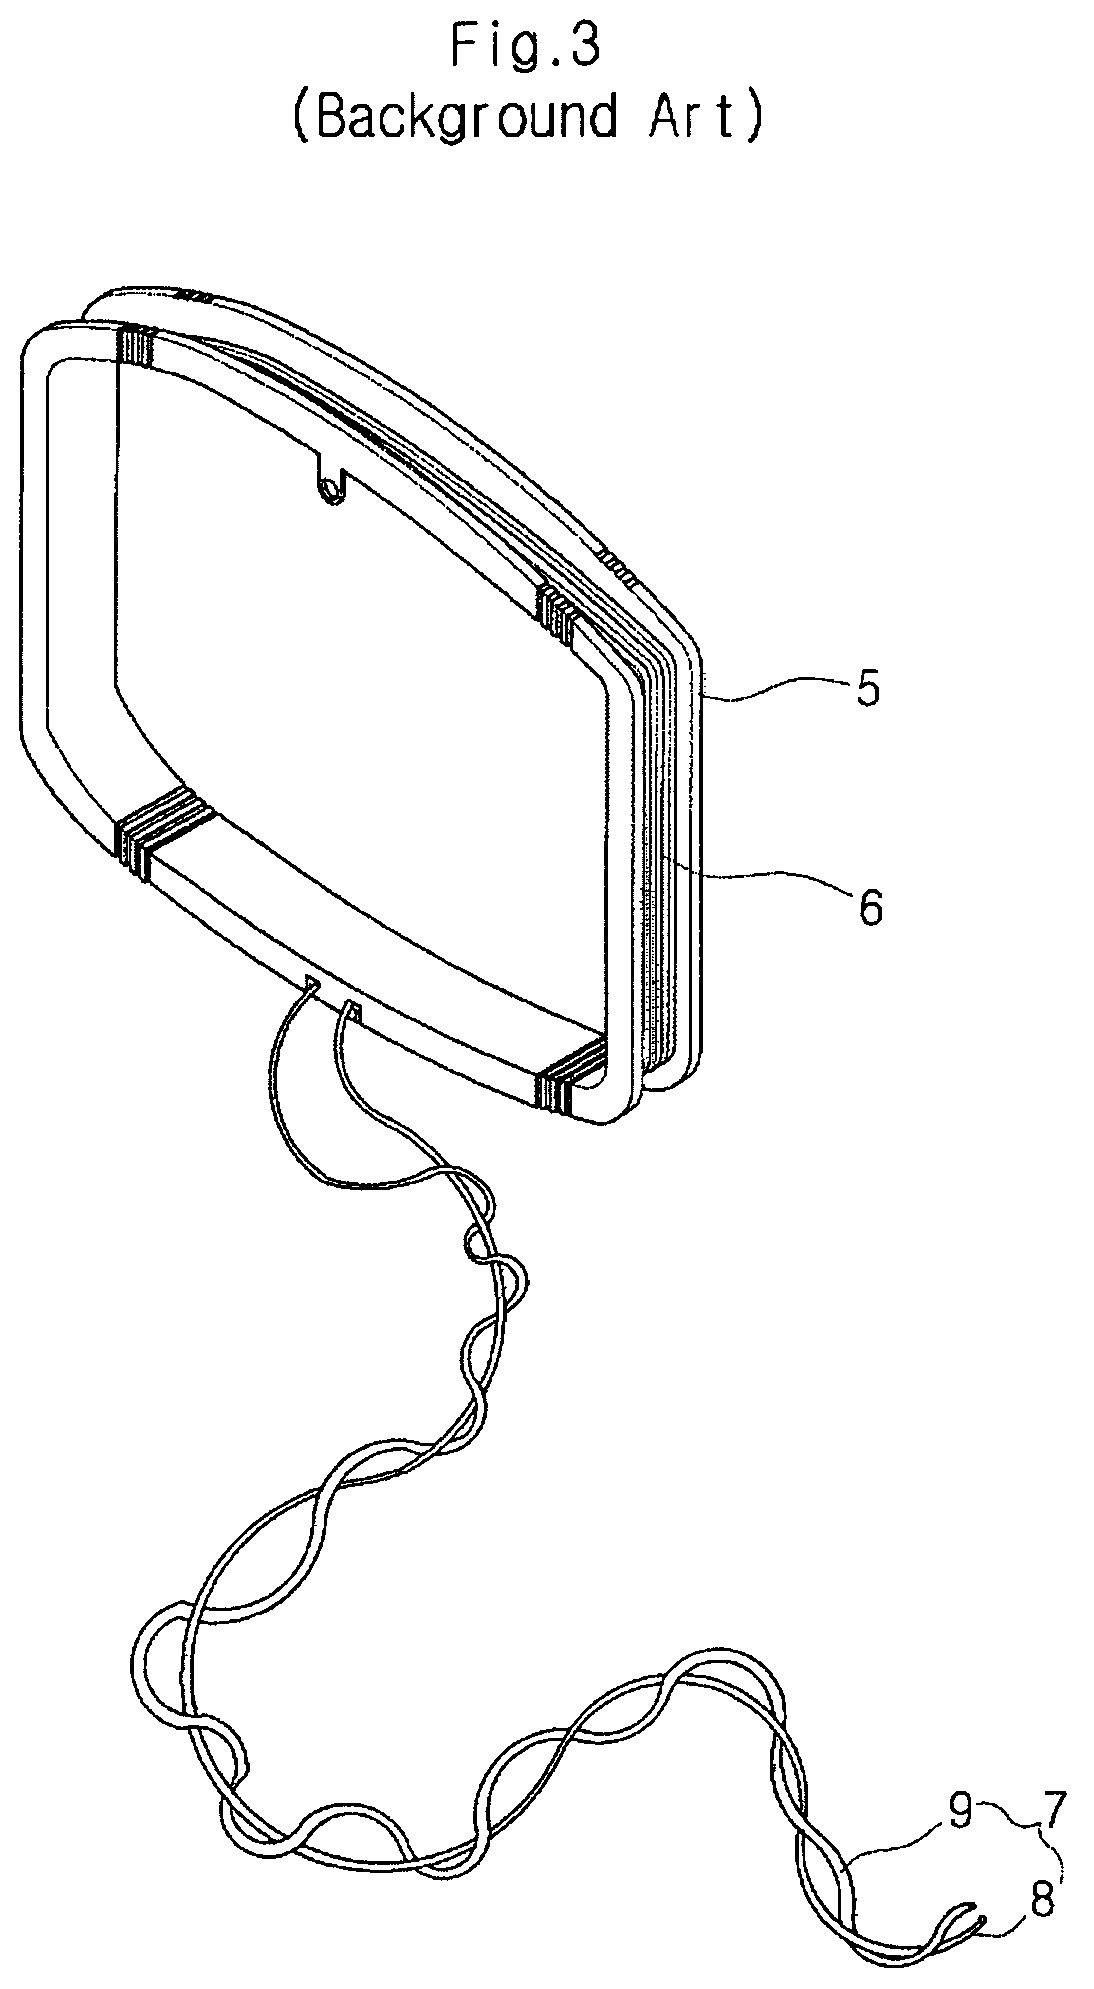 Apparatus for improving reception sensitivity of public wave receiver by reducing noise externally-emitted in the public wave receiver